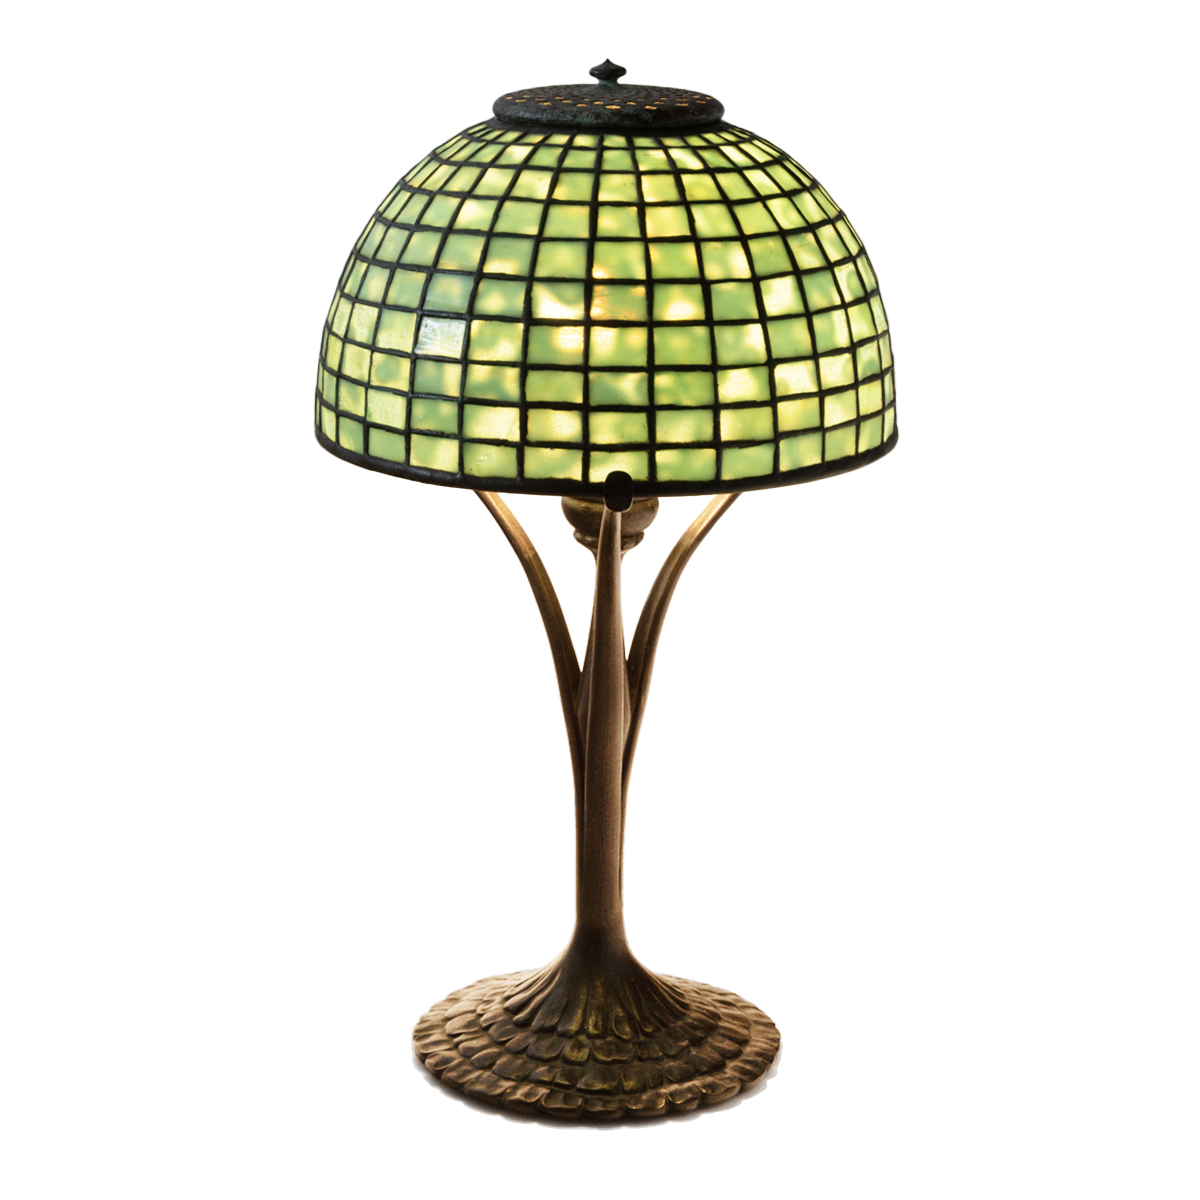 March Gallery Auction
Friday, March 15th | 10 a.m.
Tiffany Studios Table Lamp #445 with Dome Shade Estimate: $1,000 / $1,500
#michaansauctions #auctions #michaans #galleryauction #collectibles #tiffanystudios #tiffanylamp #tiffanyglass #tiffanyglasslamp #tiffanystudioslamp